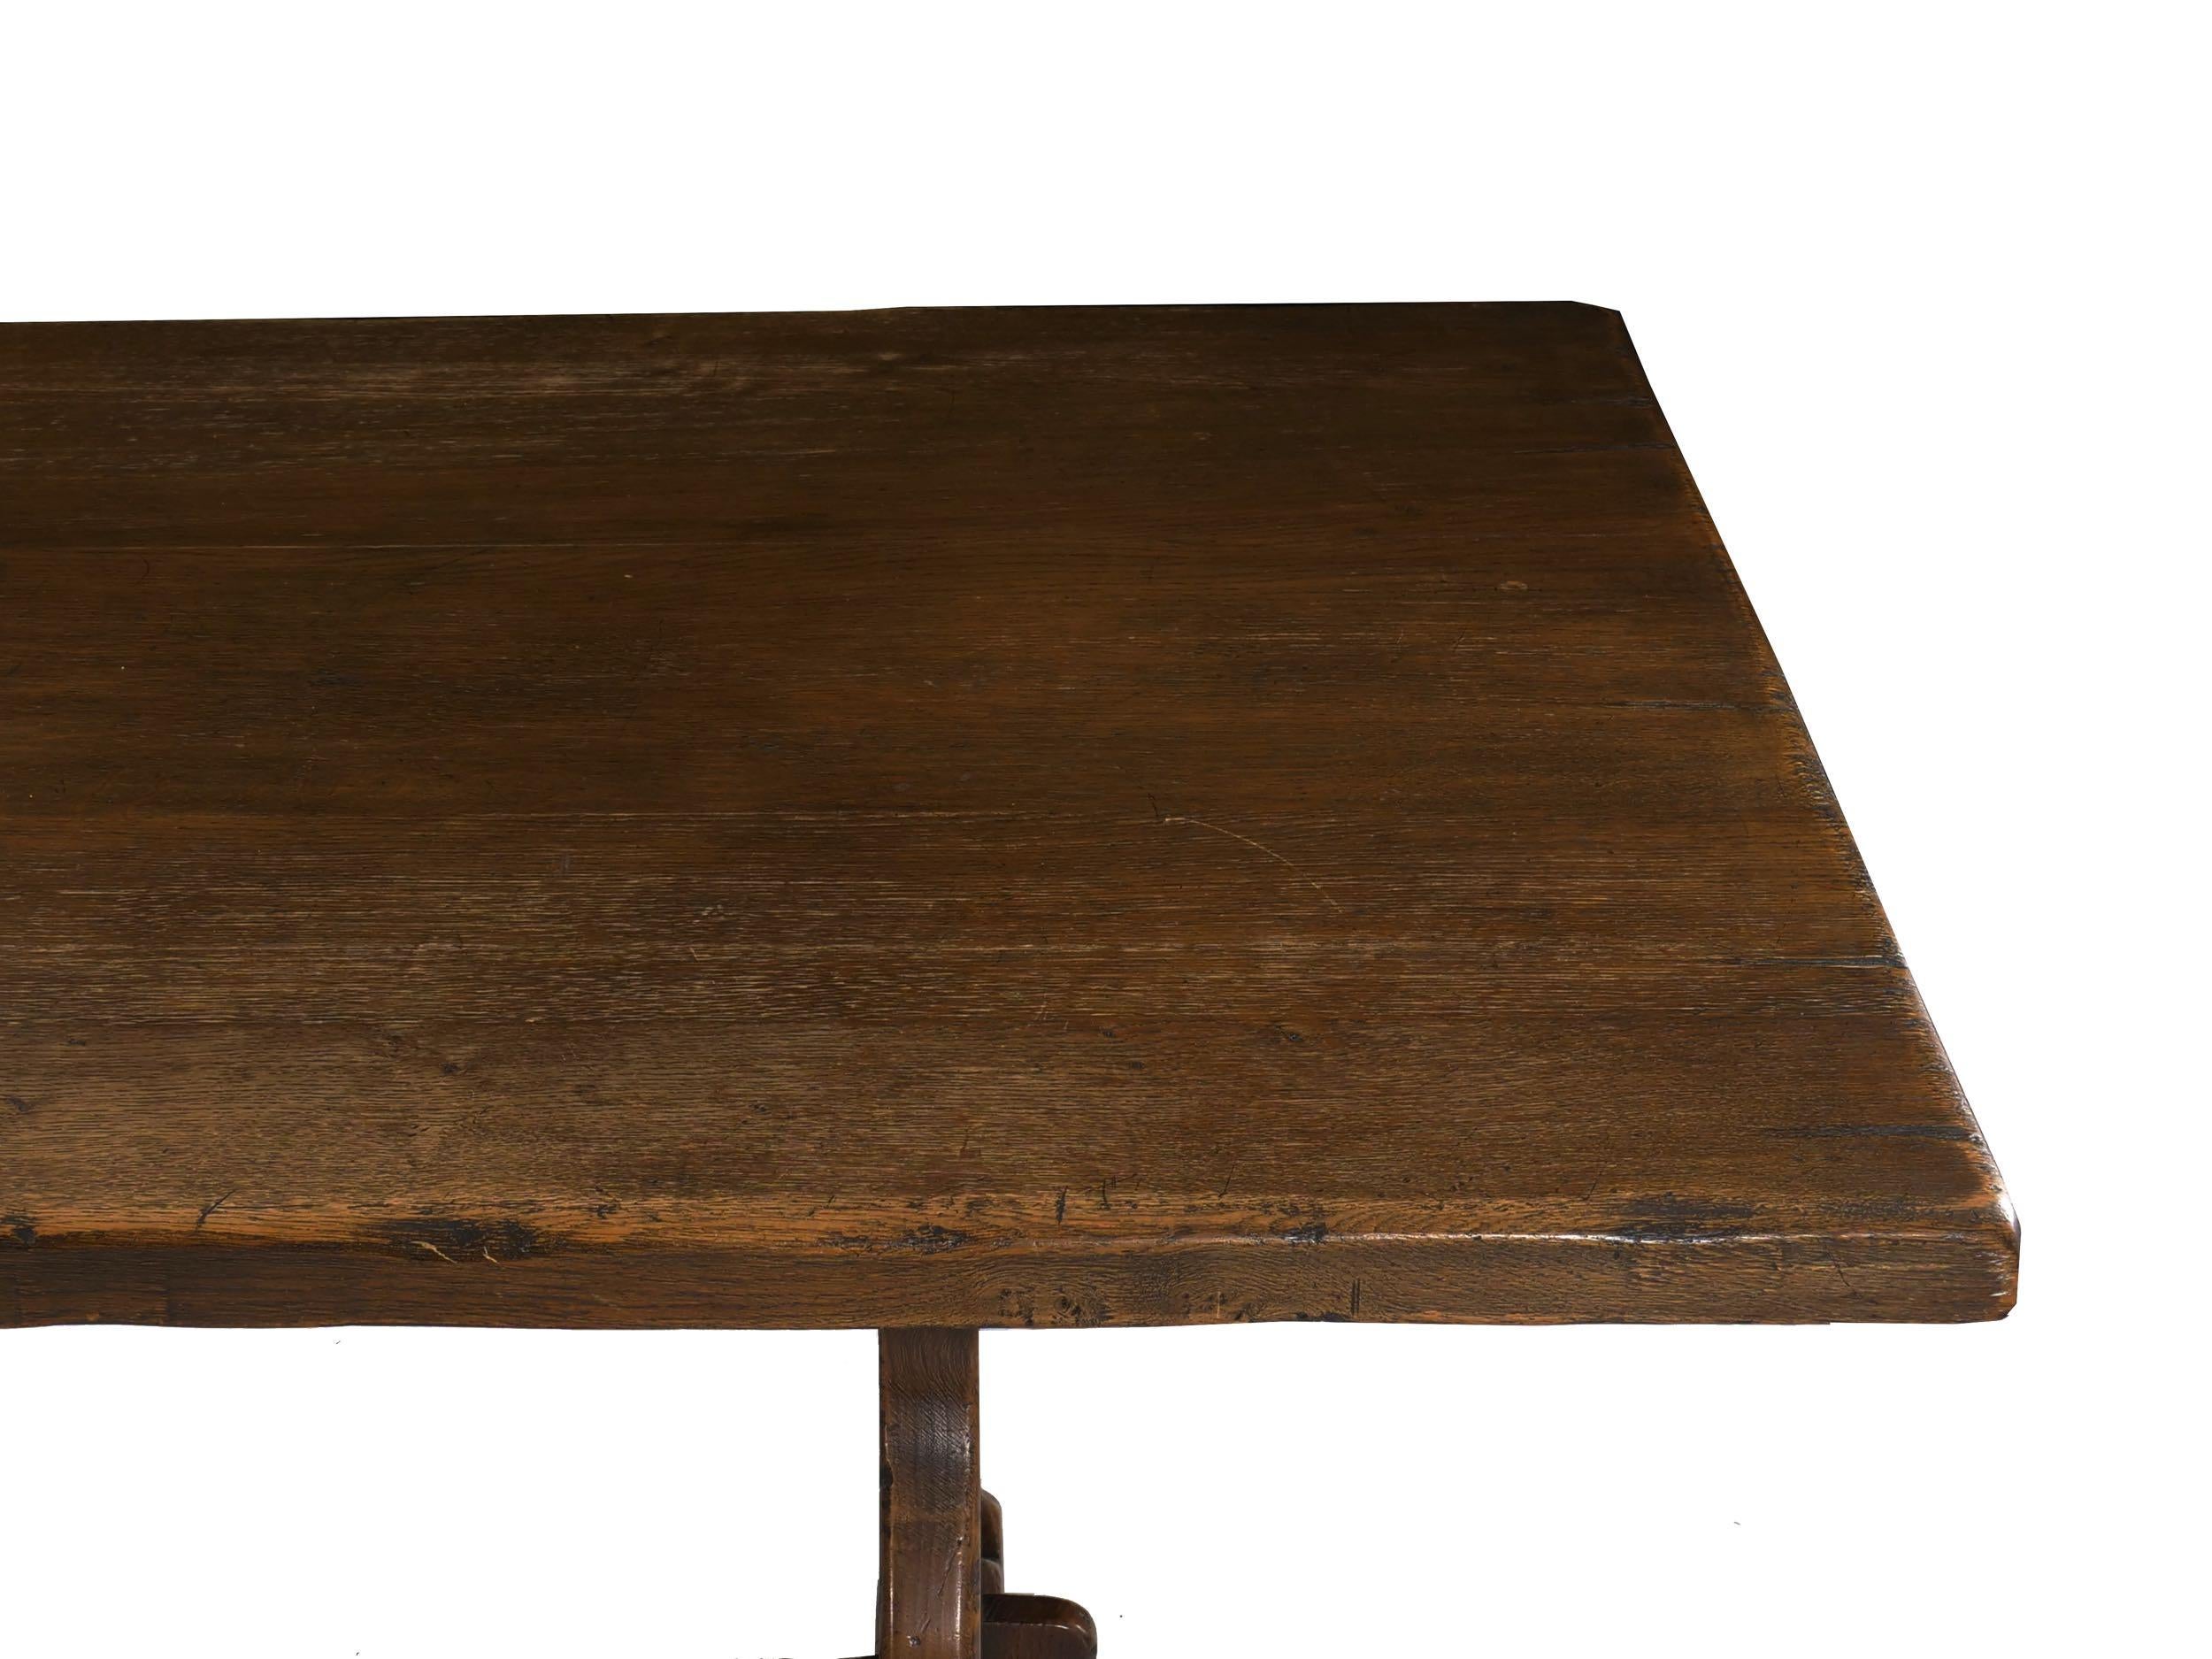 20th Century Large English Antique Oak Refectory Dining Table, Seats 8